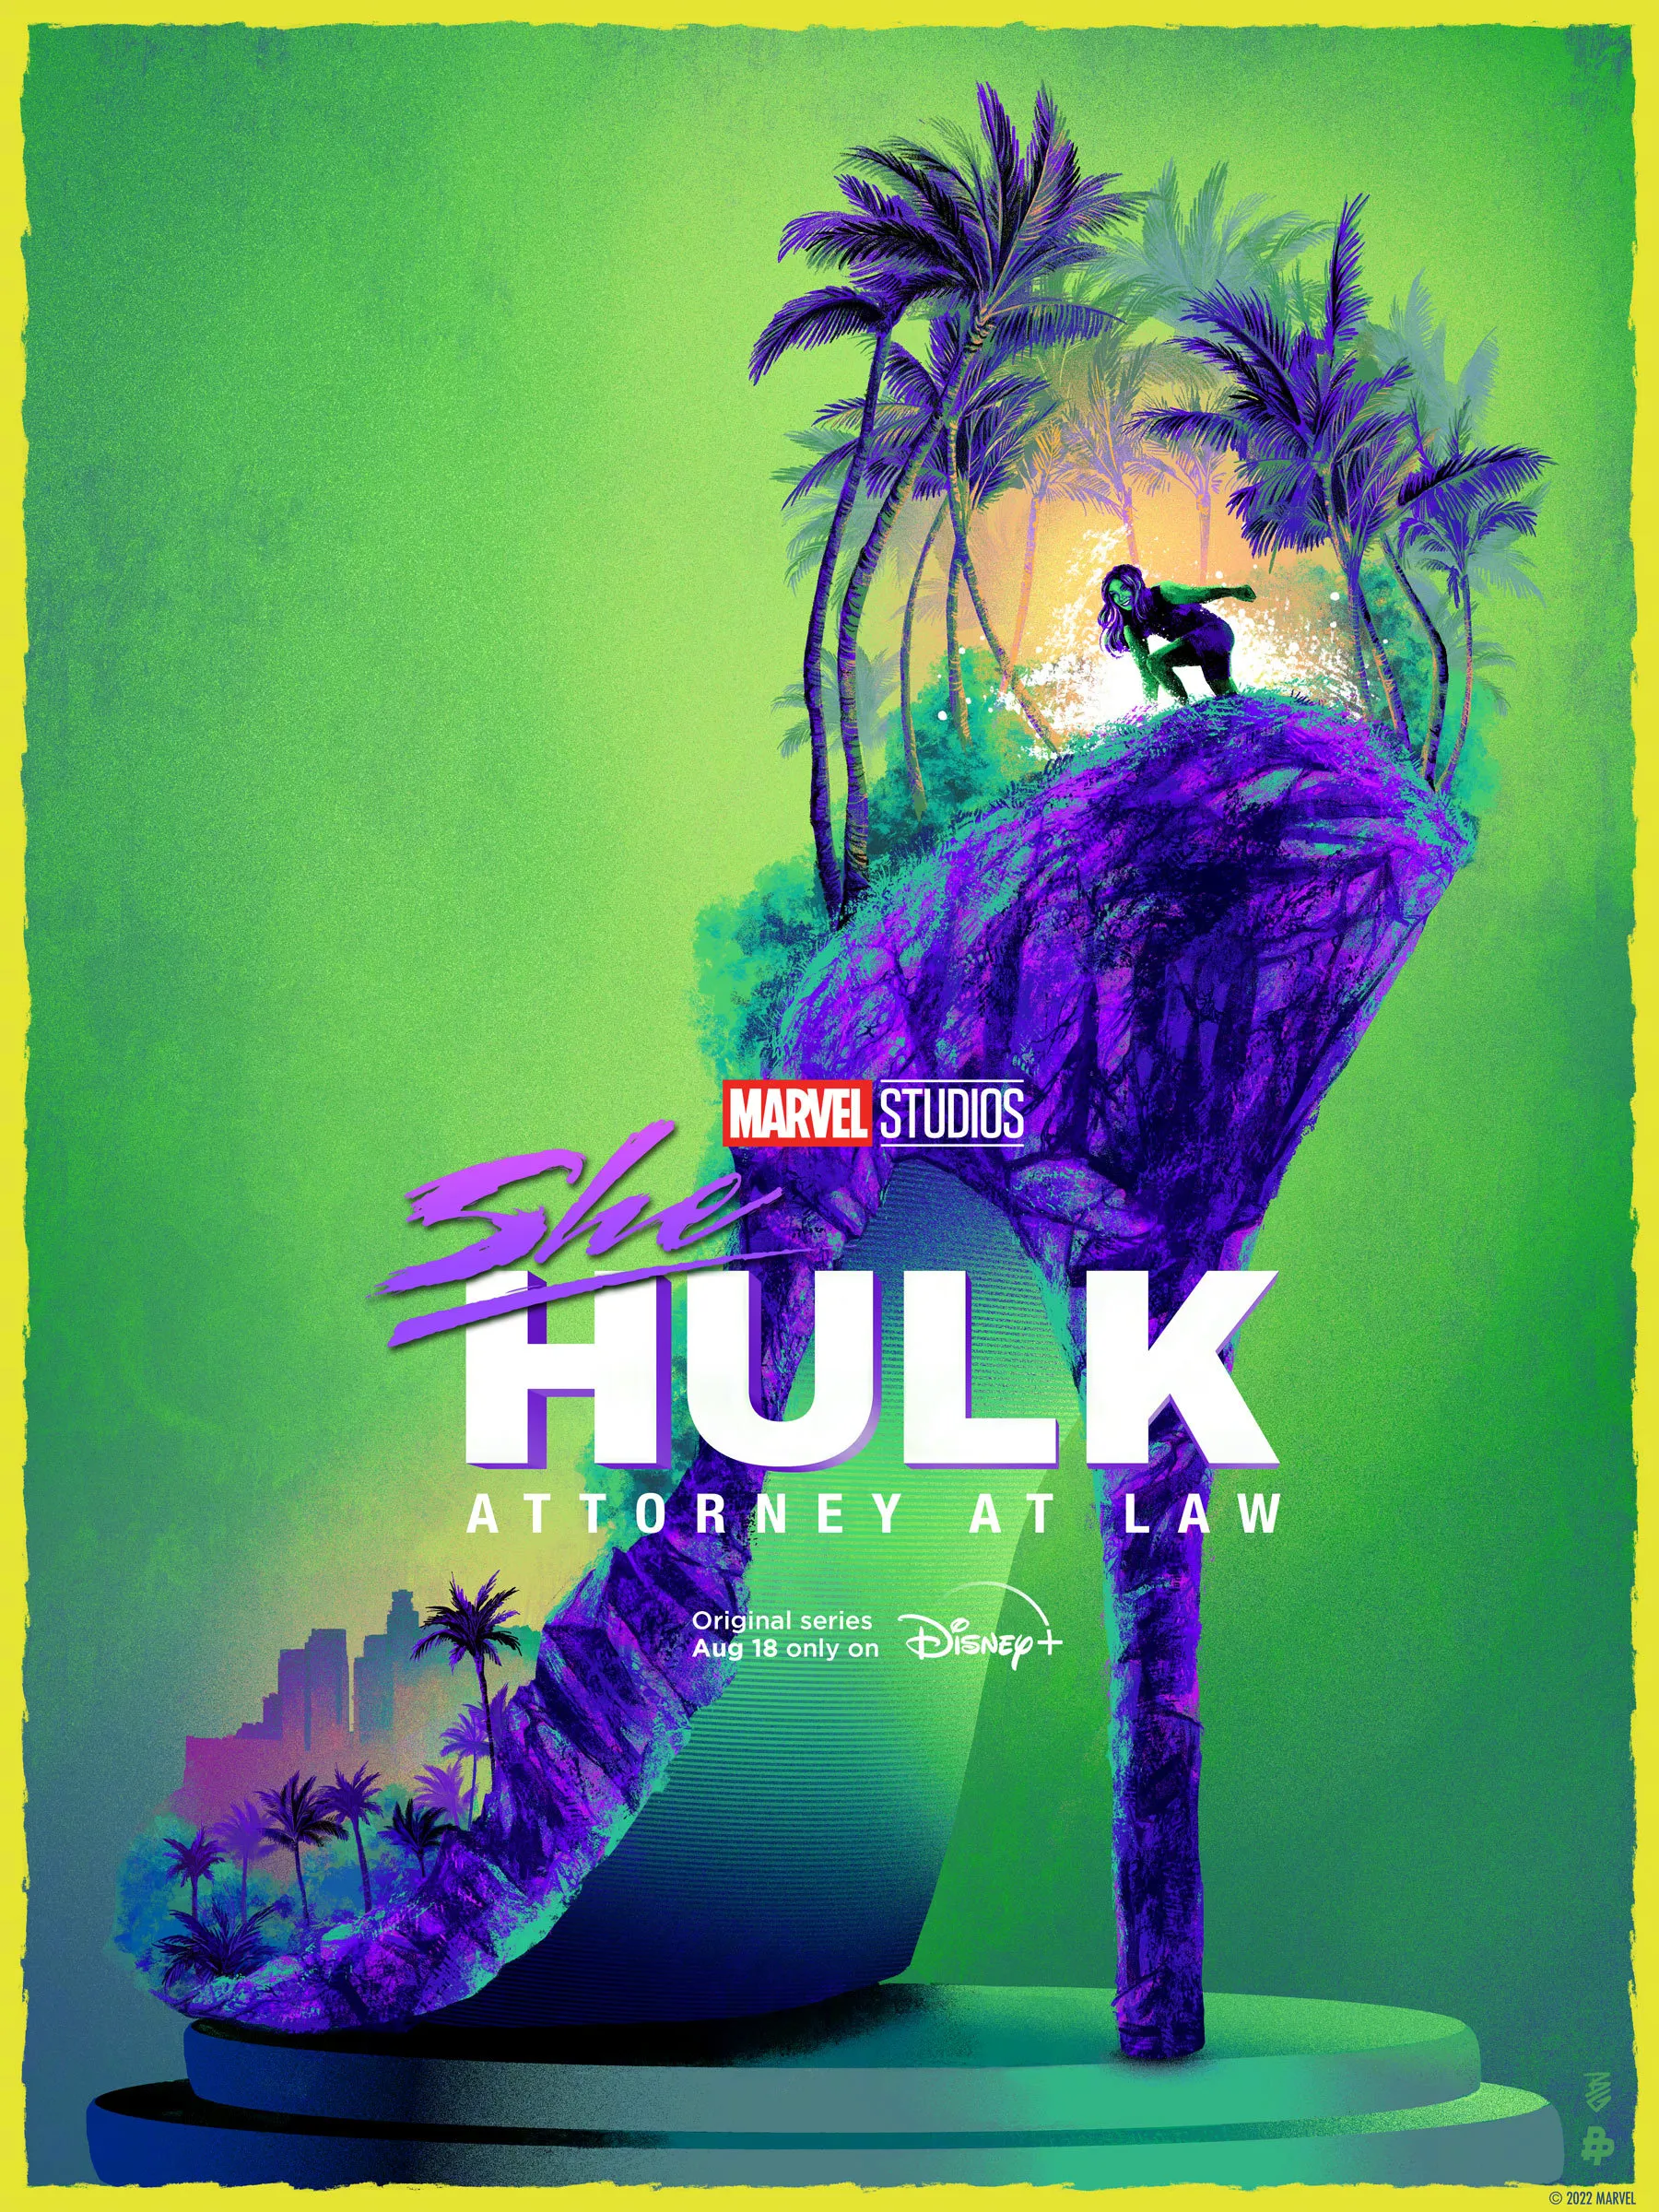 Marvel's new drama 'She-Hulk' releases new poster, airs today on Disney+ | FMV6